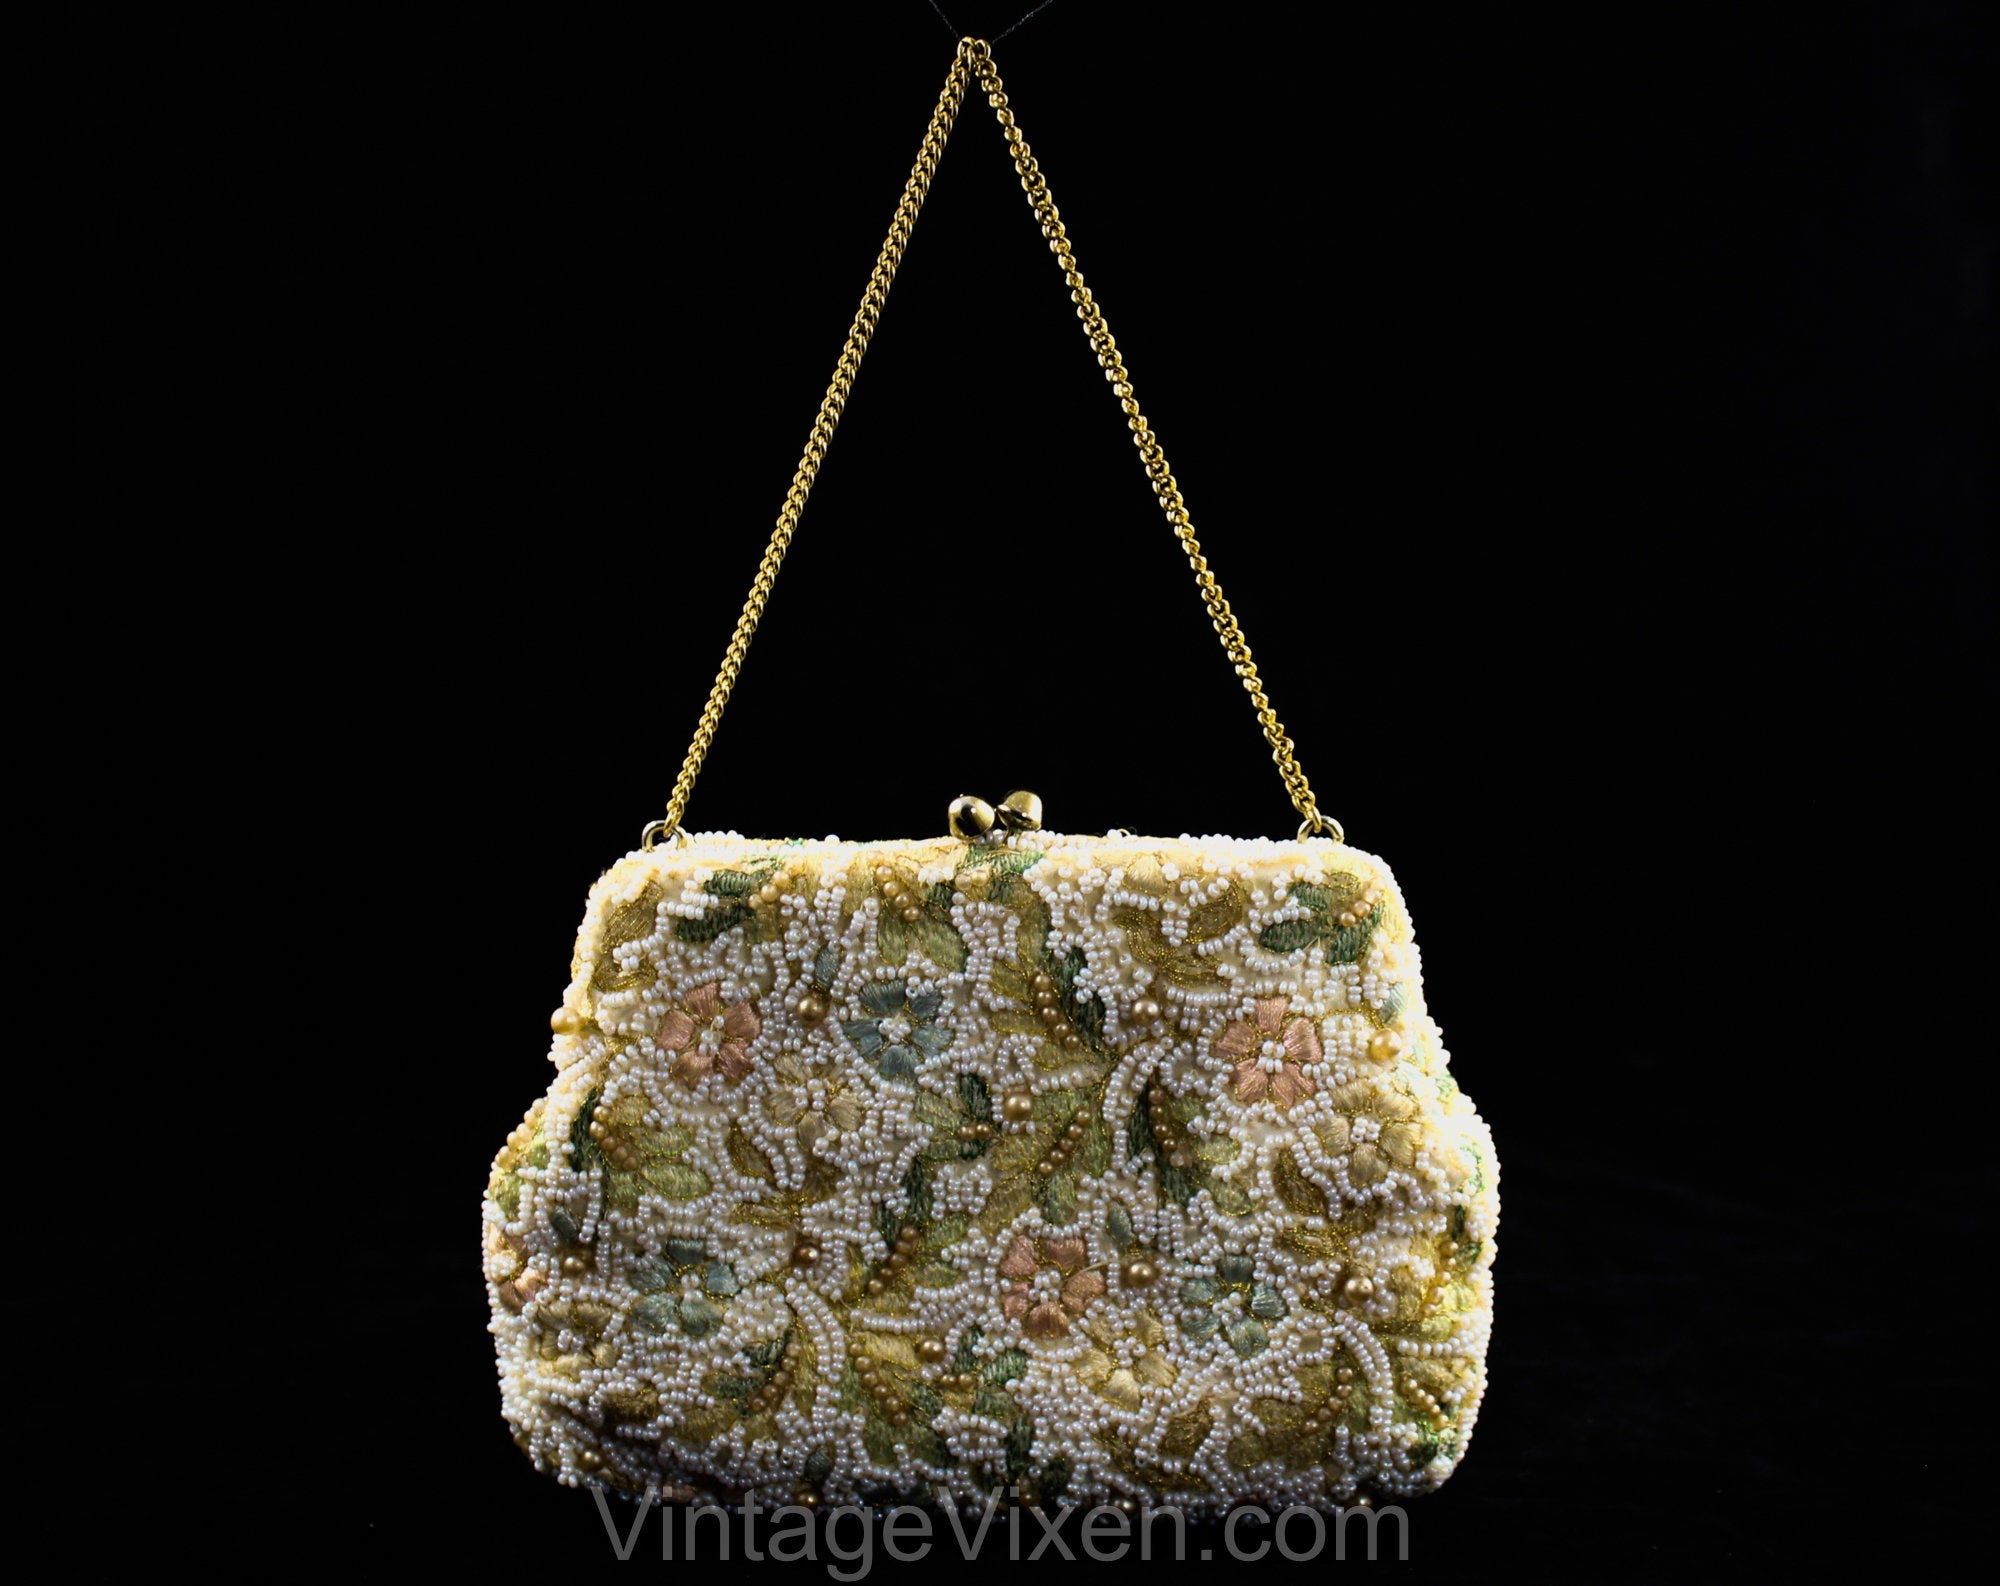 Vintage Beaded Abstract Floral Pattern Bag